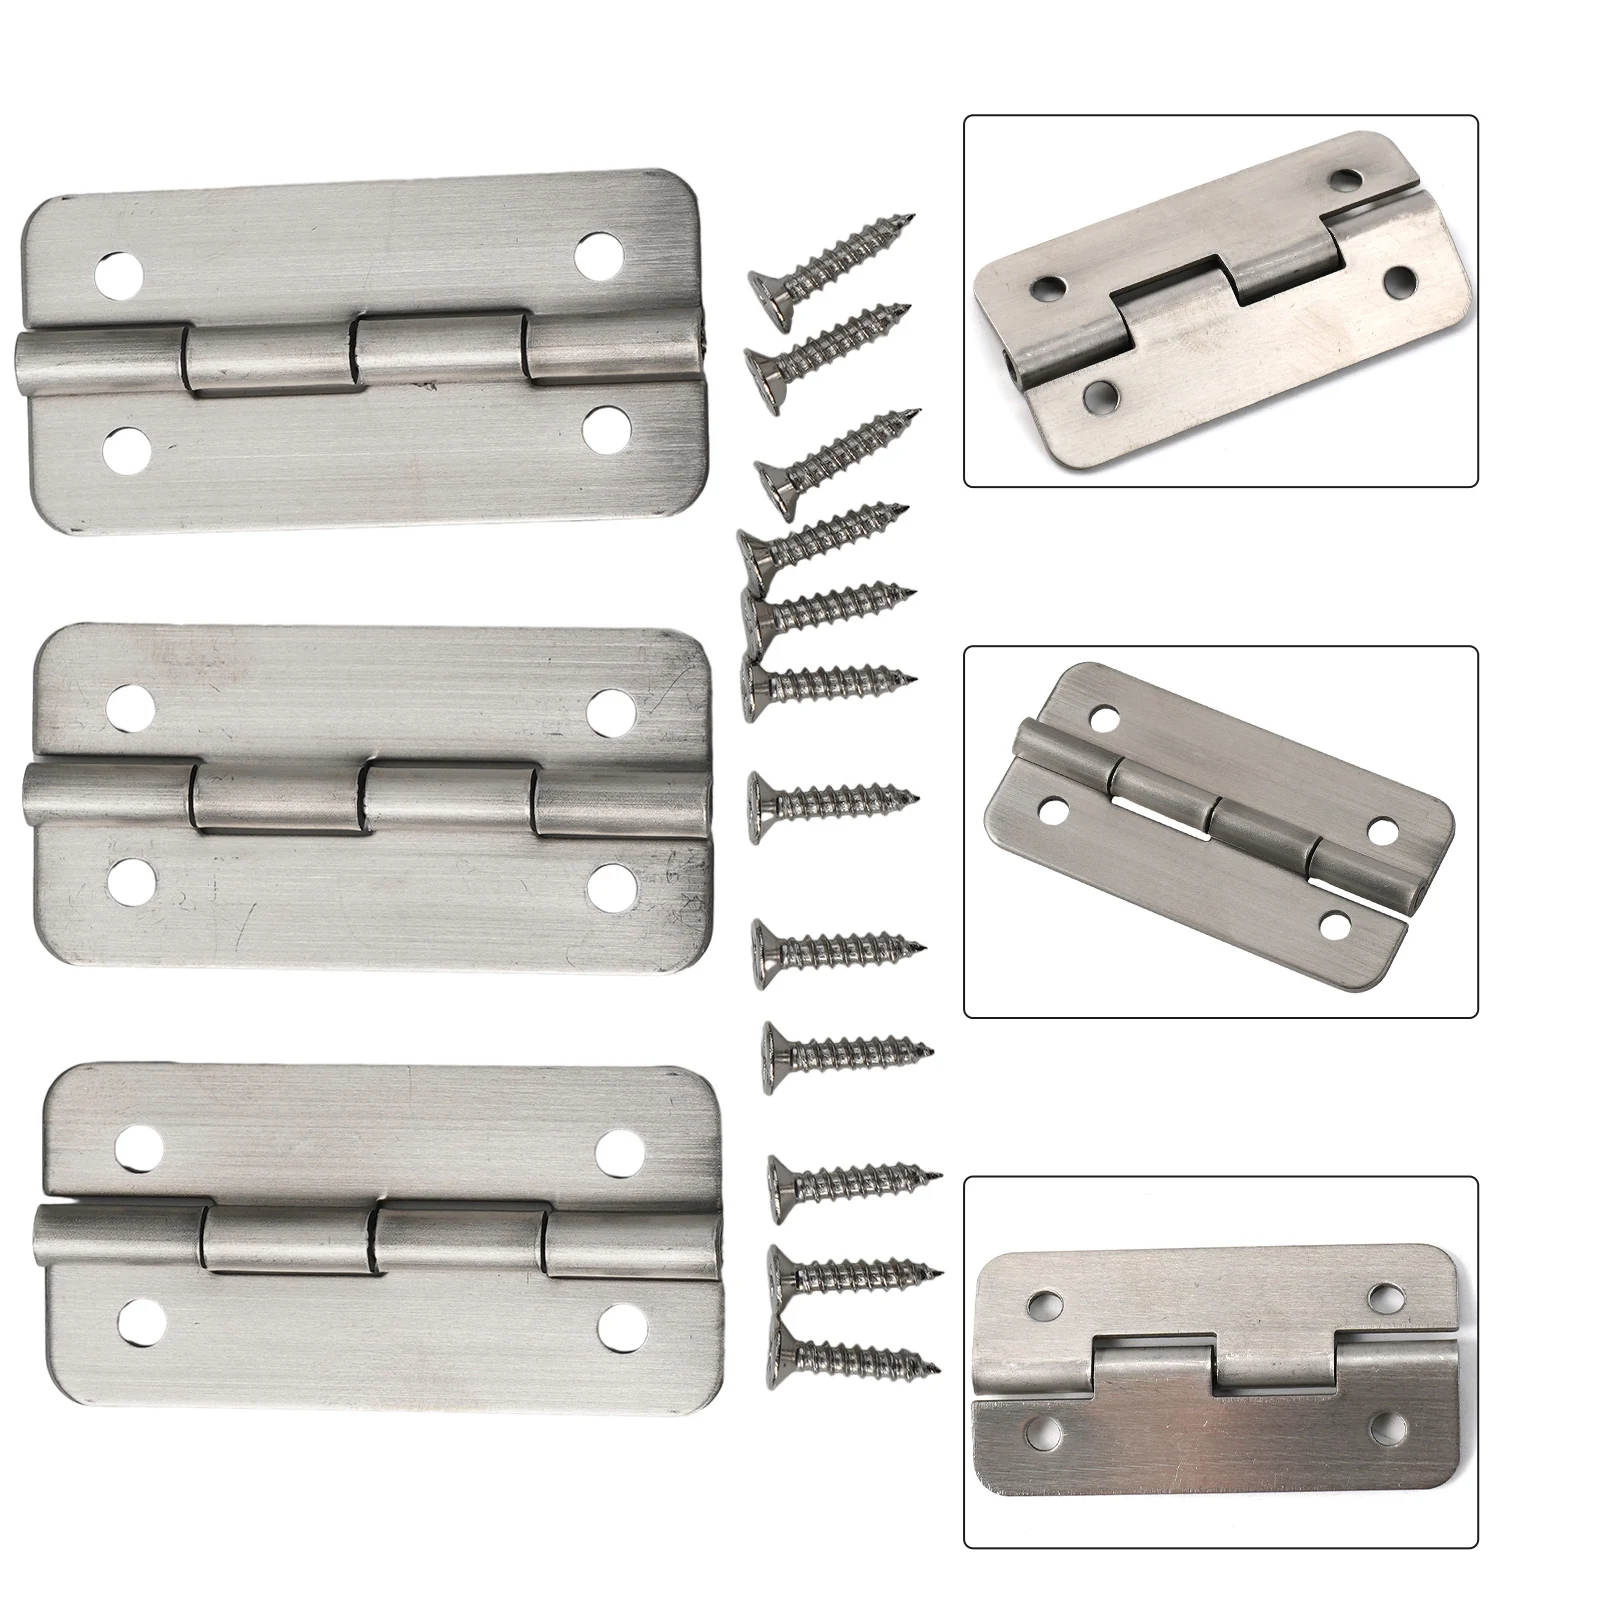 Screws Hinges Home Garden Cooler Cooler Parts For Igloo Garden Tools Hatchets Replacements 304 Stainless Steel 4pcs door butt hinges door frame black metal hinge with screws and t nut for aluminum extrusion profile 30s